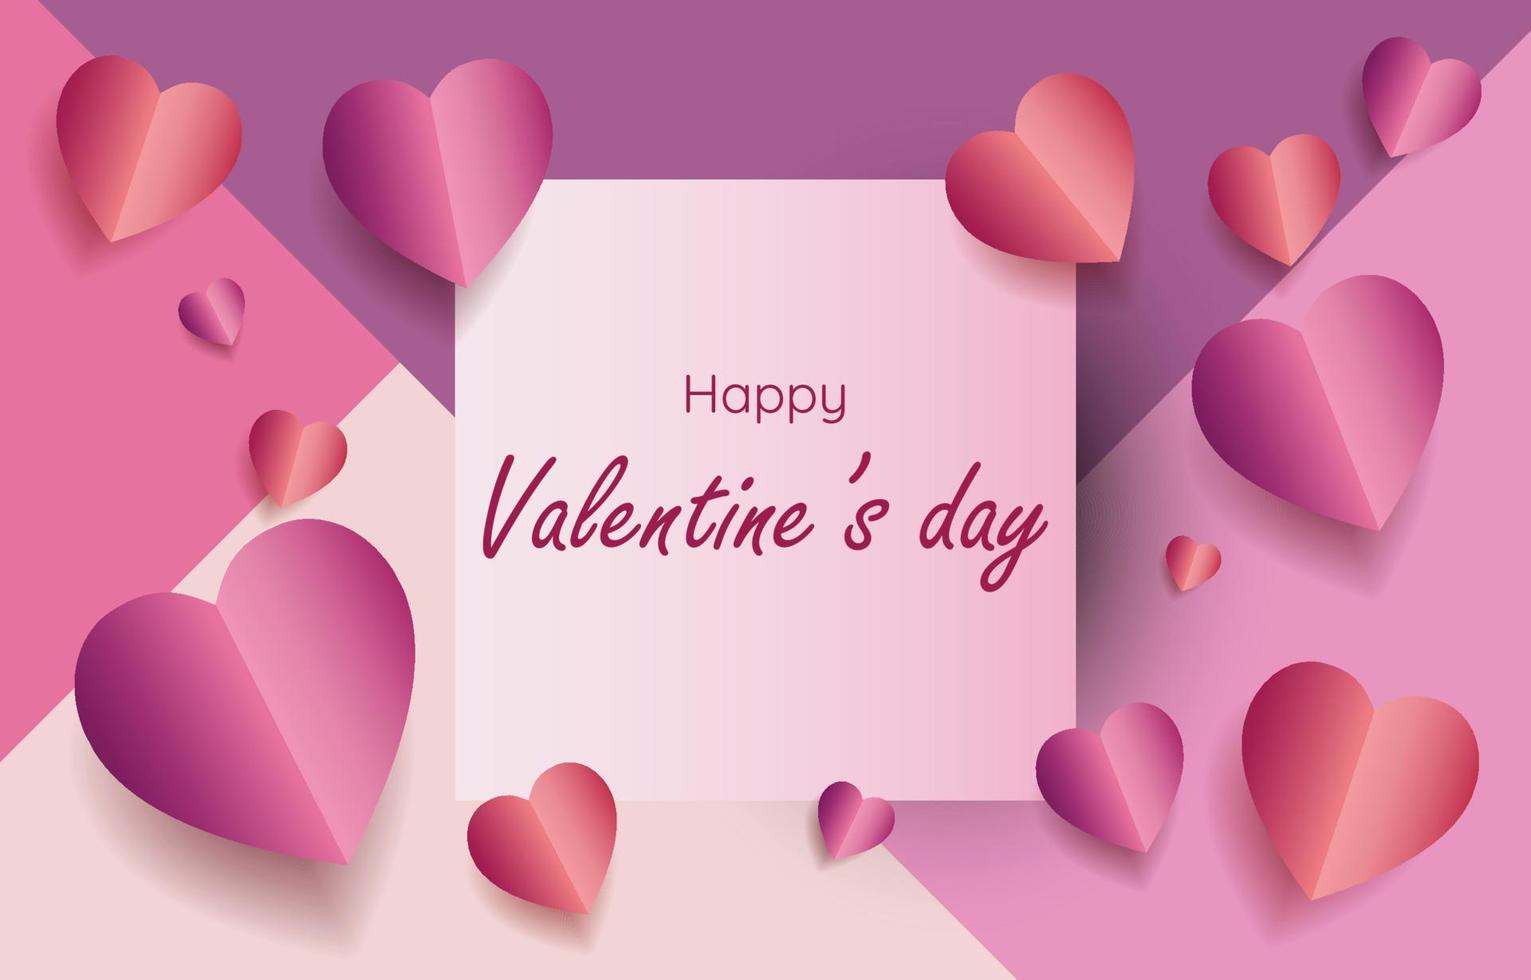 Paper cut elements in shape of heart with Square frame with a greetingon pink and sweet background. Vector symbols of love for Happy Valentine's Day, greeting card design.